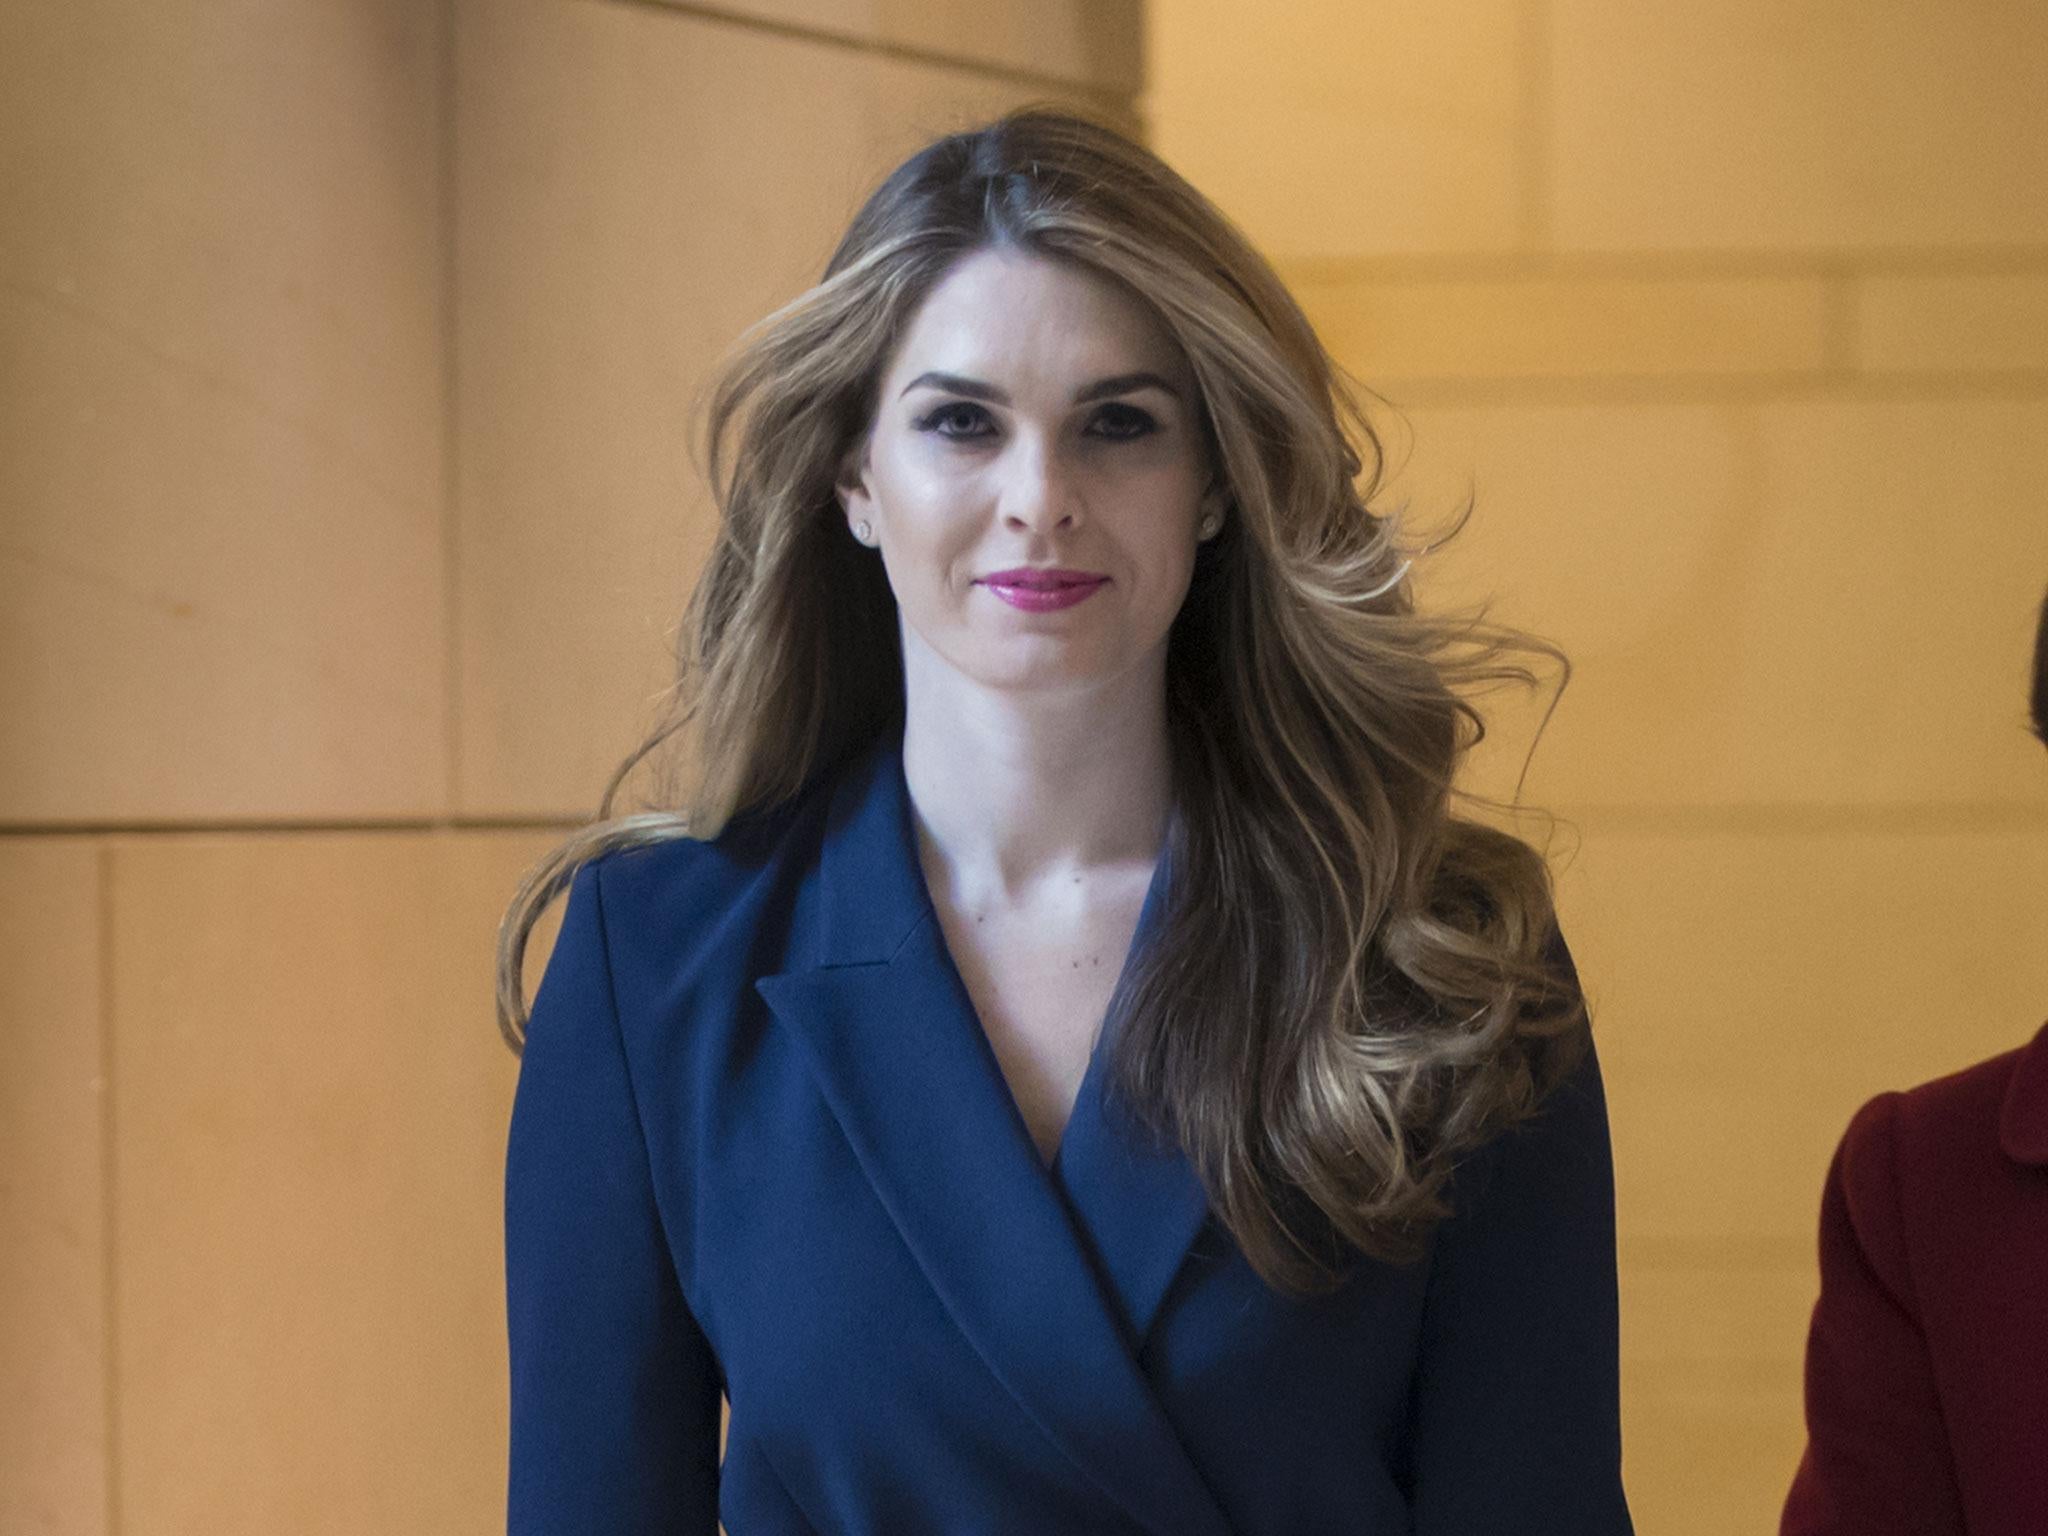 In an official statement, Donald Trump called Hope Hicks a 'truly great person' and said he would miss having her at his side